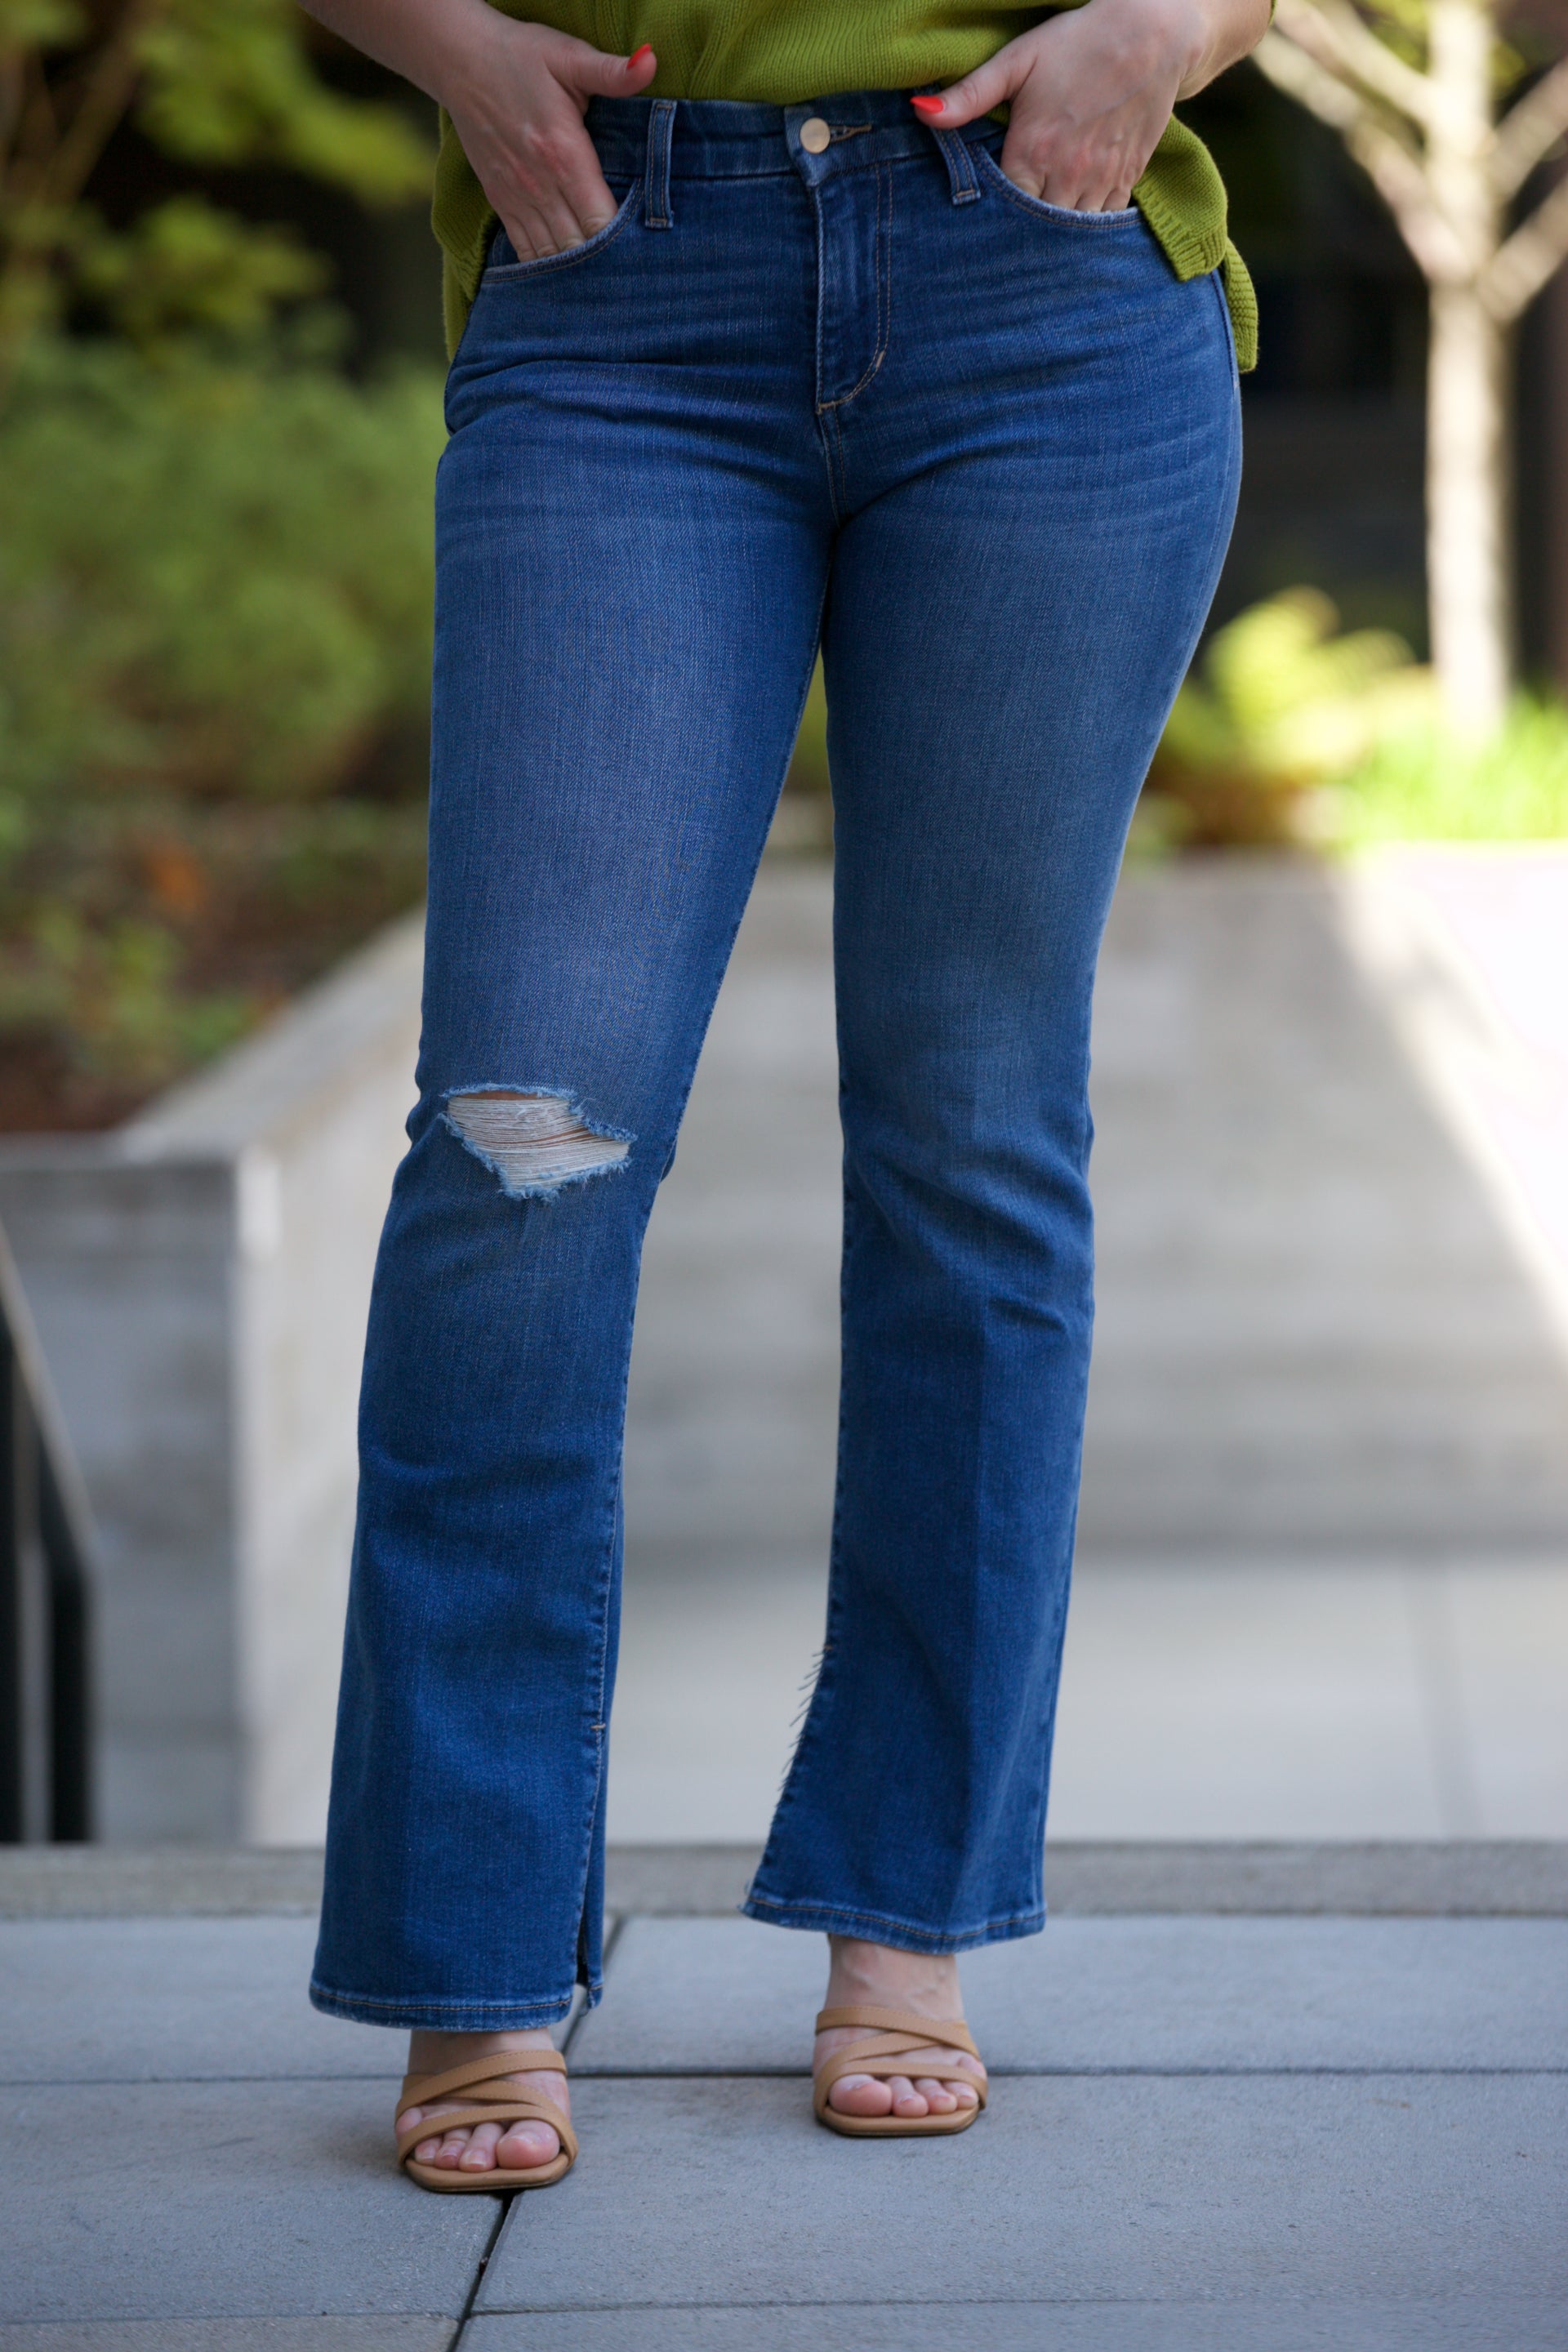 JOE'S JEANS The Provocateur Petite Bootcut in Far Out